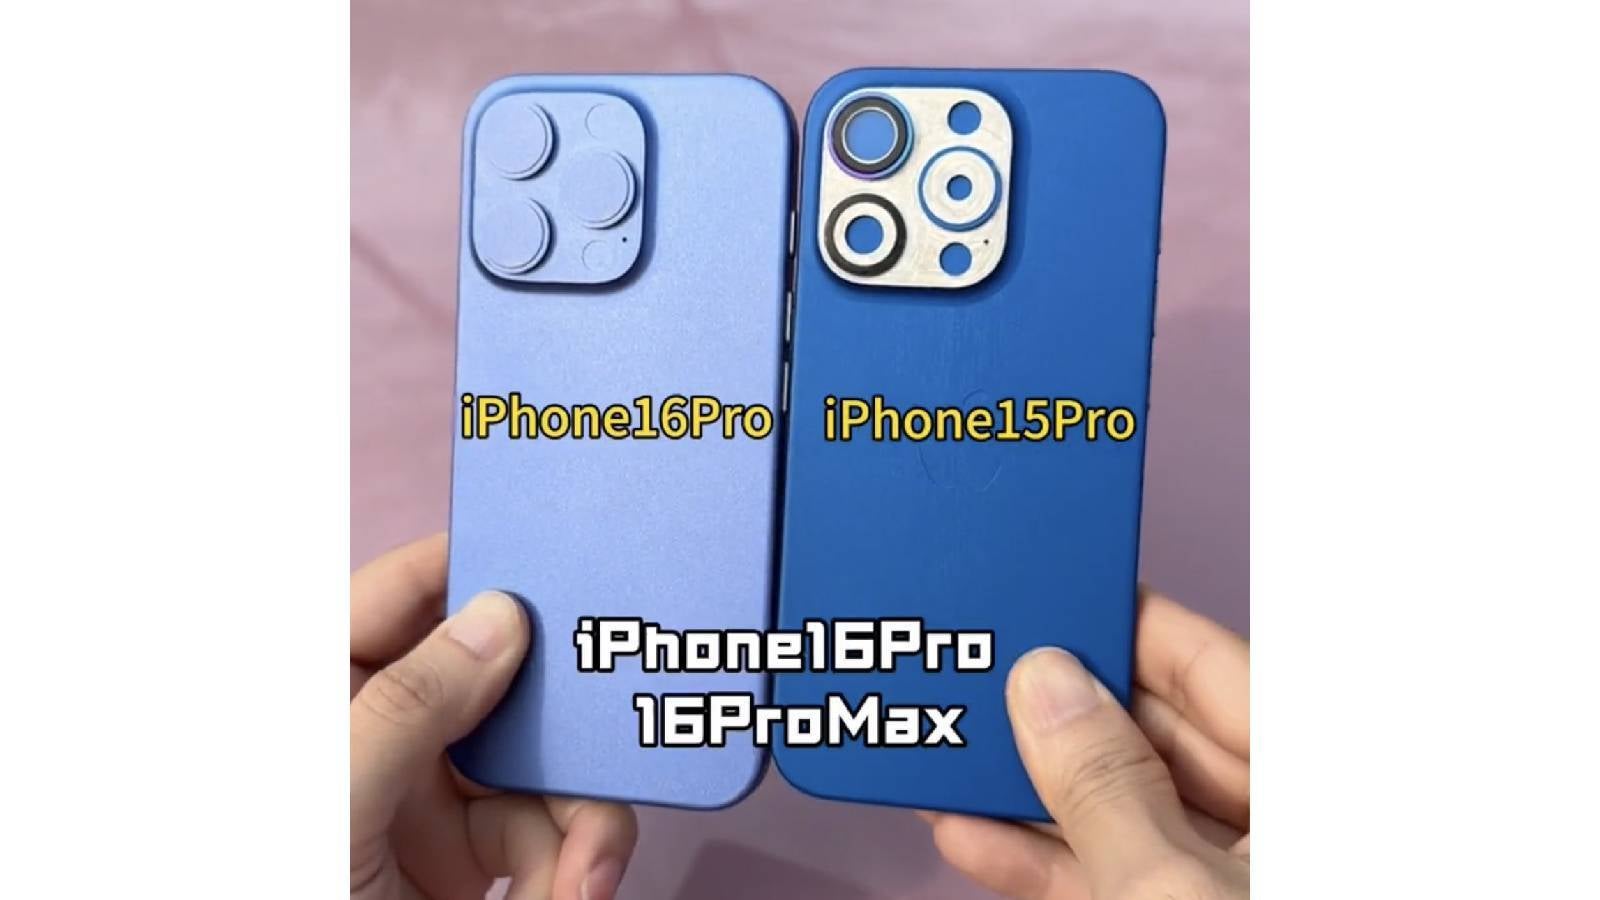 iPhone 16 Pro expected to be bigger than iPhone 15 Pro - Few iPhone 16 surprises left as images of dummy units and case leaked